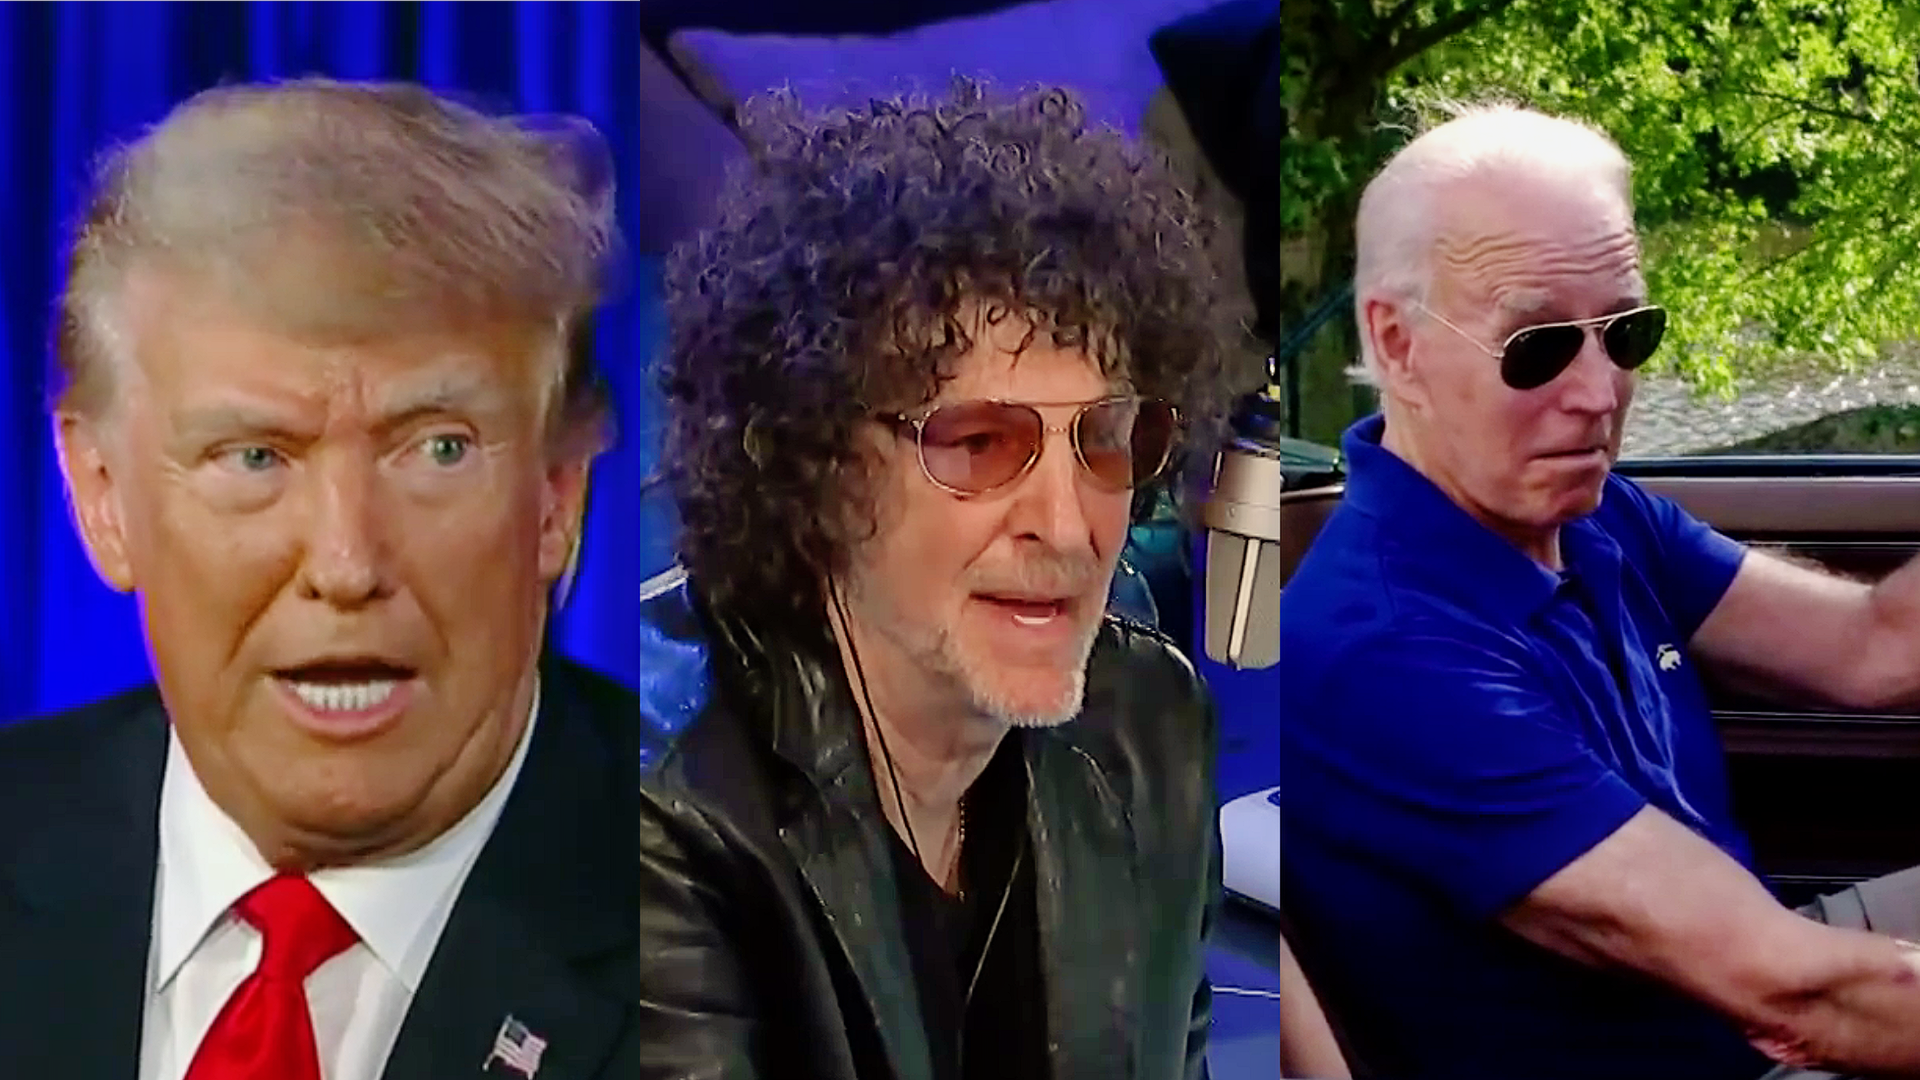 Trump Goes on Dead-of-Night Rage Bender At Howard Stern and Biden’s ‘All-Electric Car Hoax’ (mediaite.com)